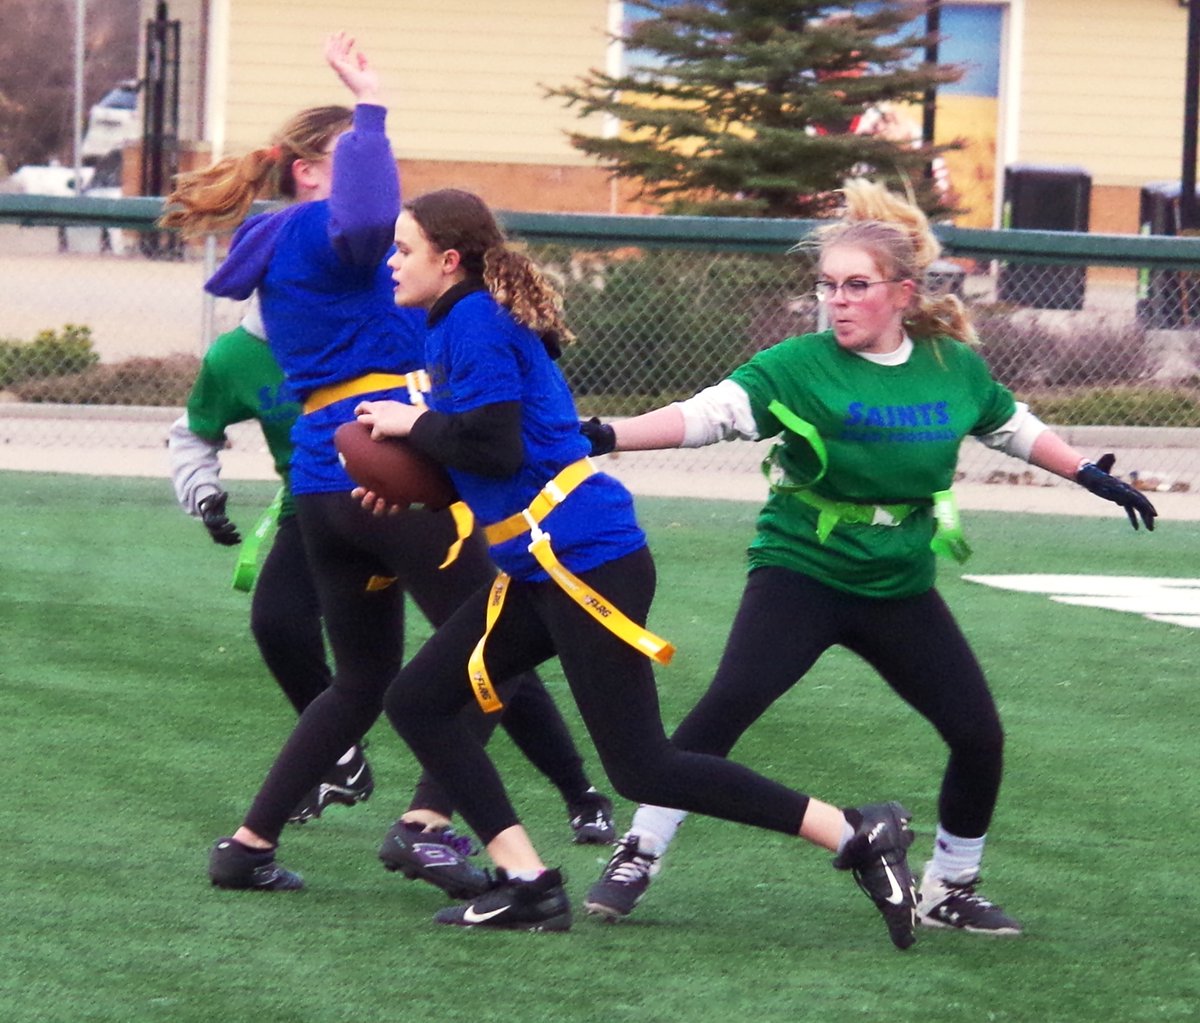 #TBT goes back to Rush Female High School Flag Football league action April 24, 2023 at SMF Field. The conditions were cooler, and the players were all in long sleeve shirts and other warm clothing. SMF Field is snow covered right now but should be back in action soon. #Yxe.